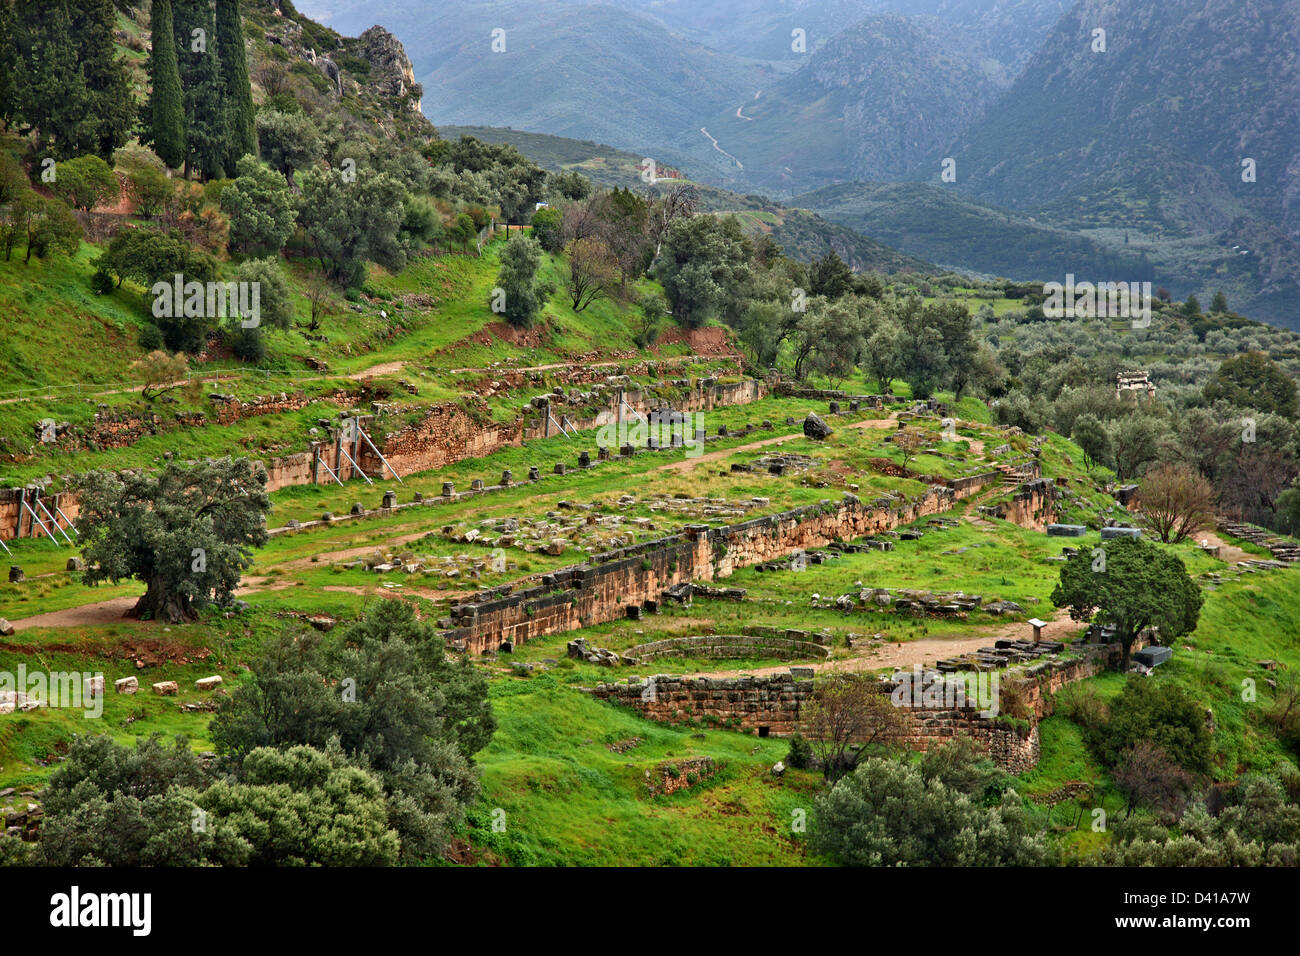 The Gymnasium at  ancient Delphi, the 'navel'  and most important oracle of the ancient world, Fokida, Central Greece. Stock Photo